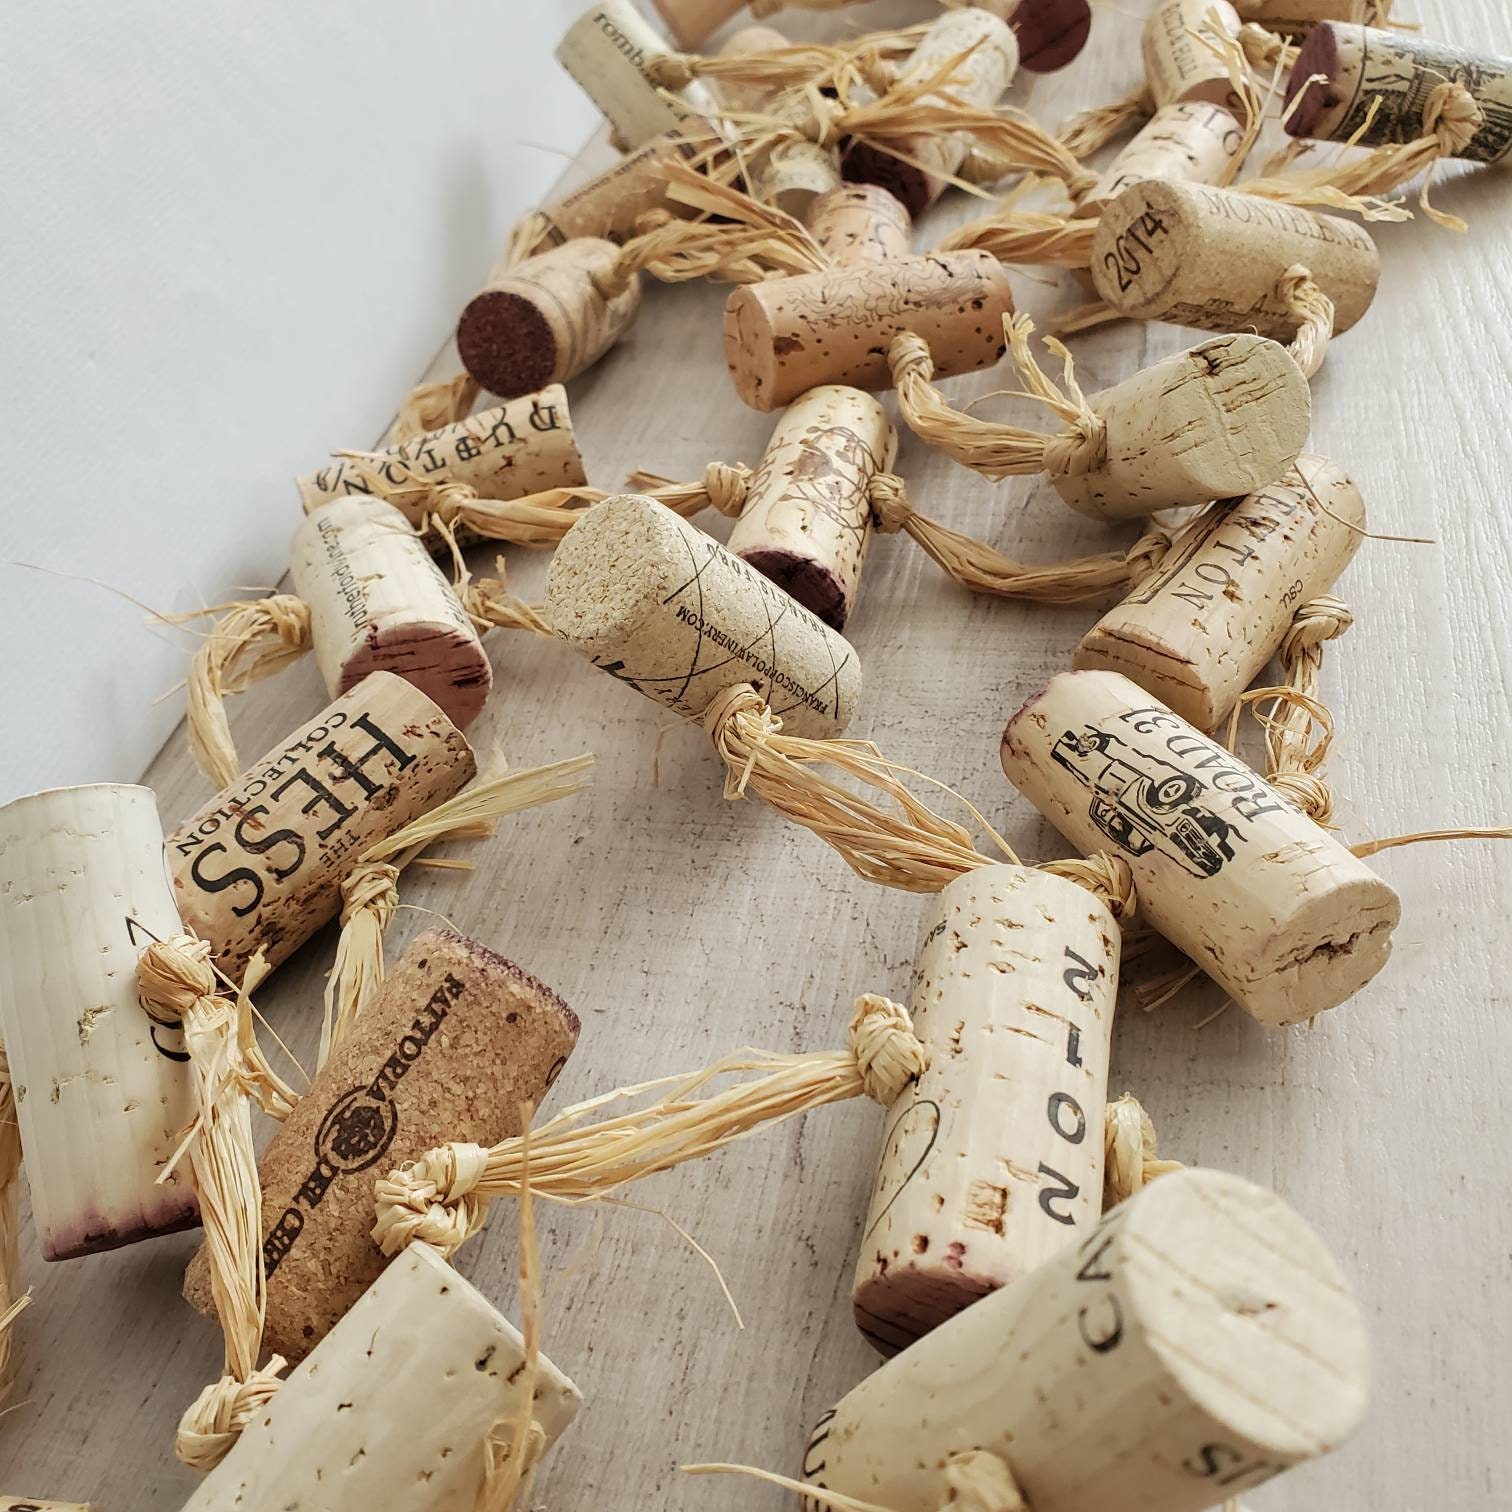 Free Ship 1000 Natural Used WINE Corks for Crafts, Red & White, No